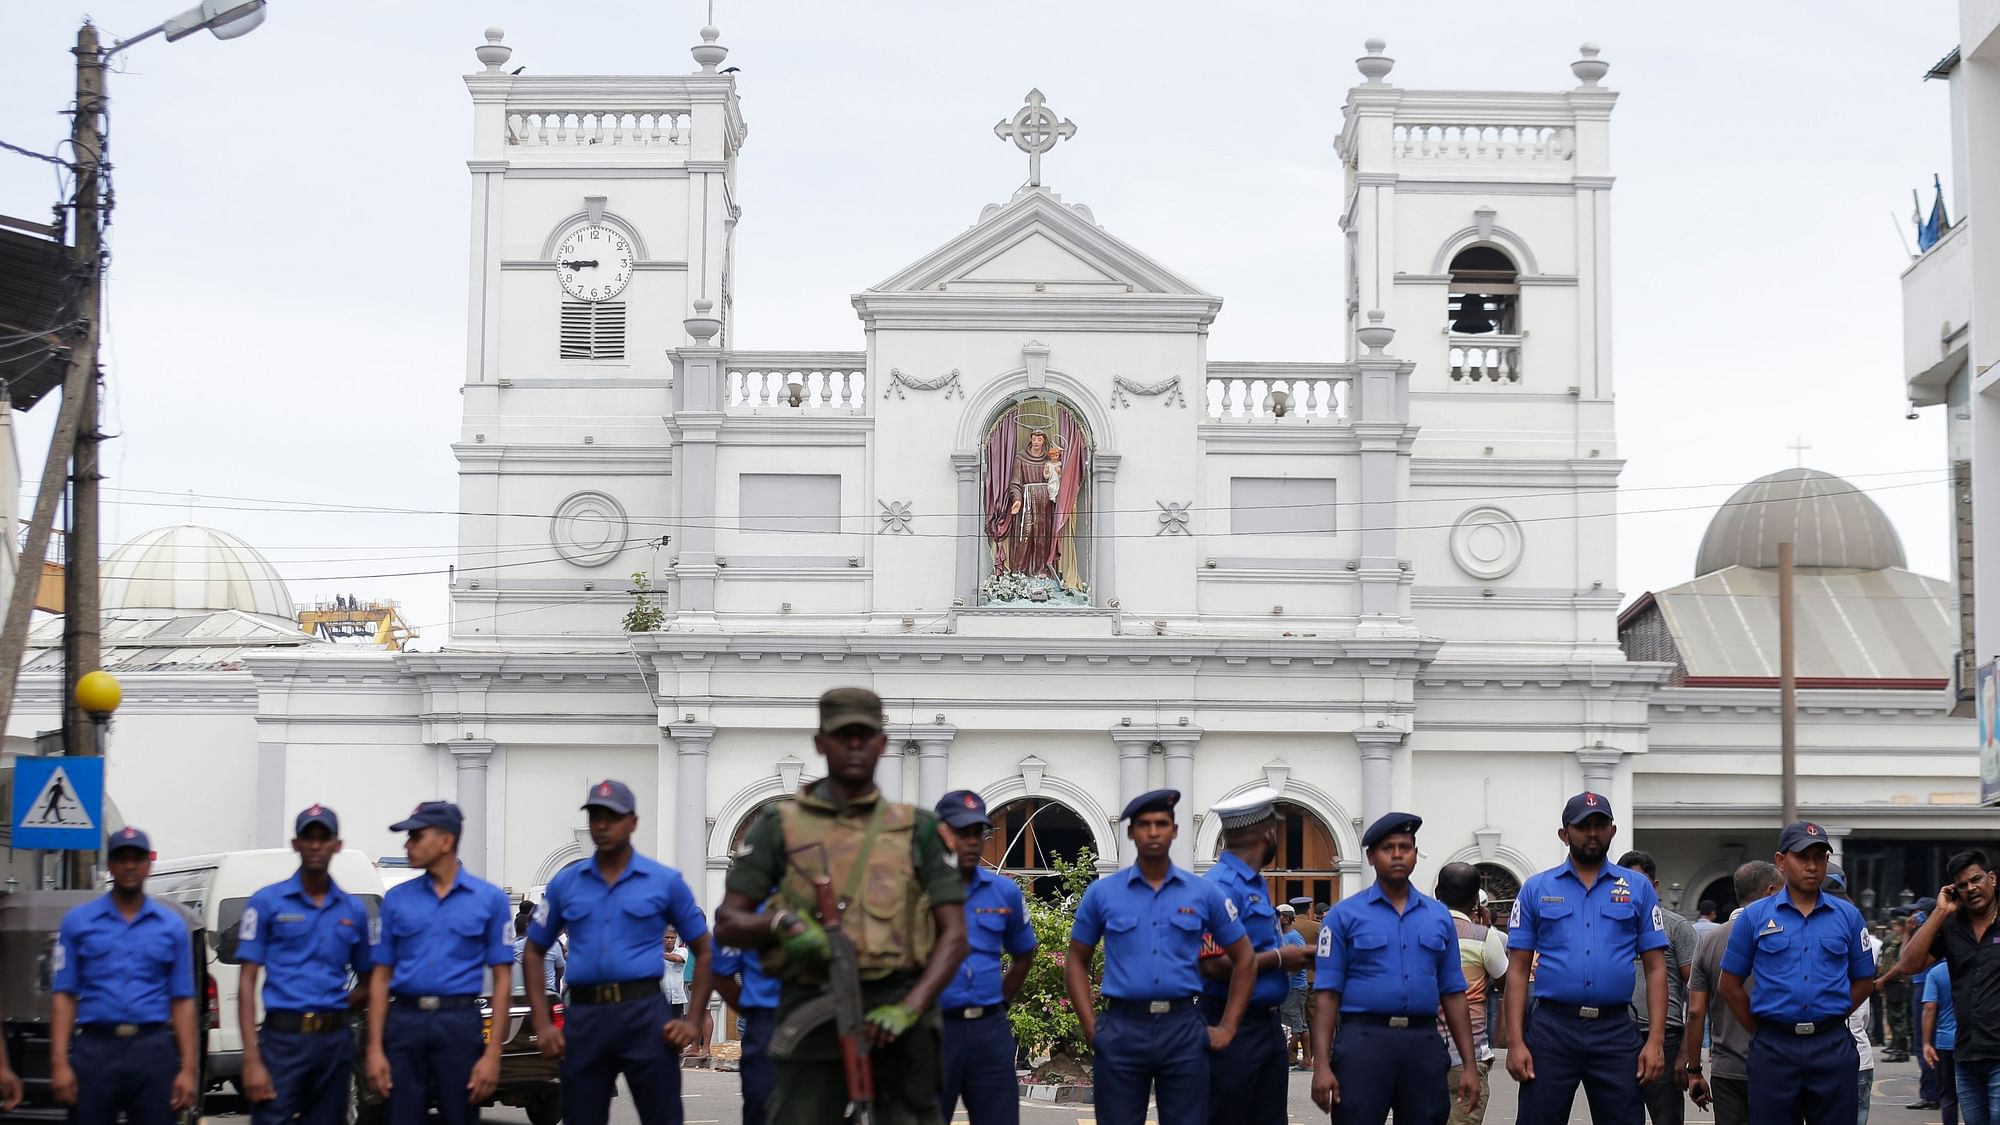 Nearly 300 people were killed and hundreds more hospitalised from injuries in eight blasts that rocked some churches and hotels in Sri Lanka on Easter Sunday.